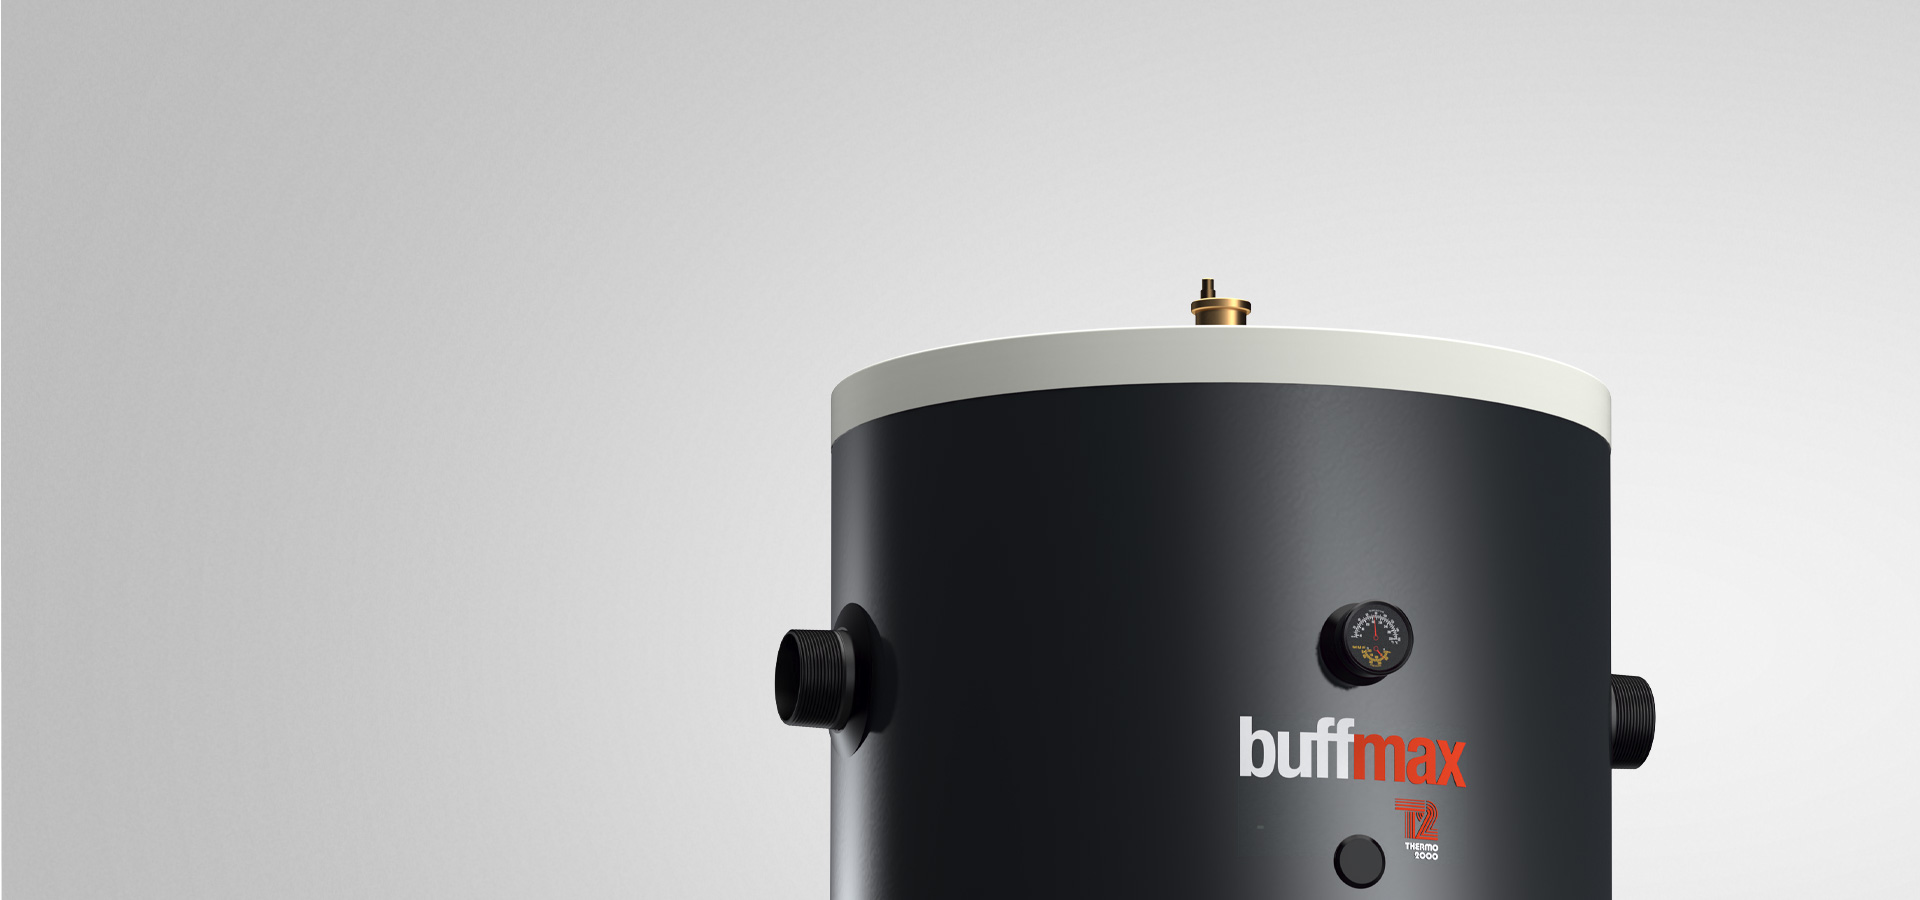 BuffMax residential and commercial buffer tank